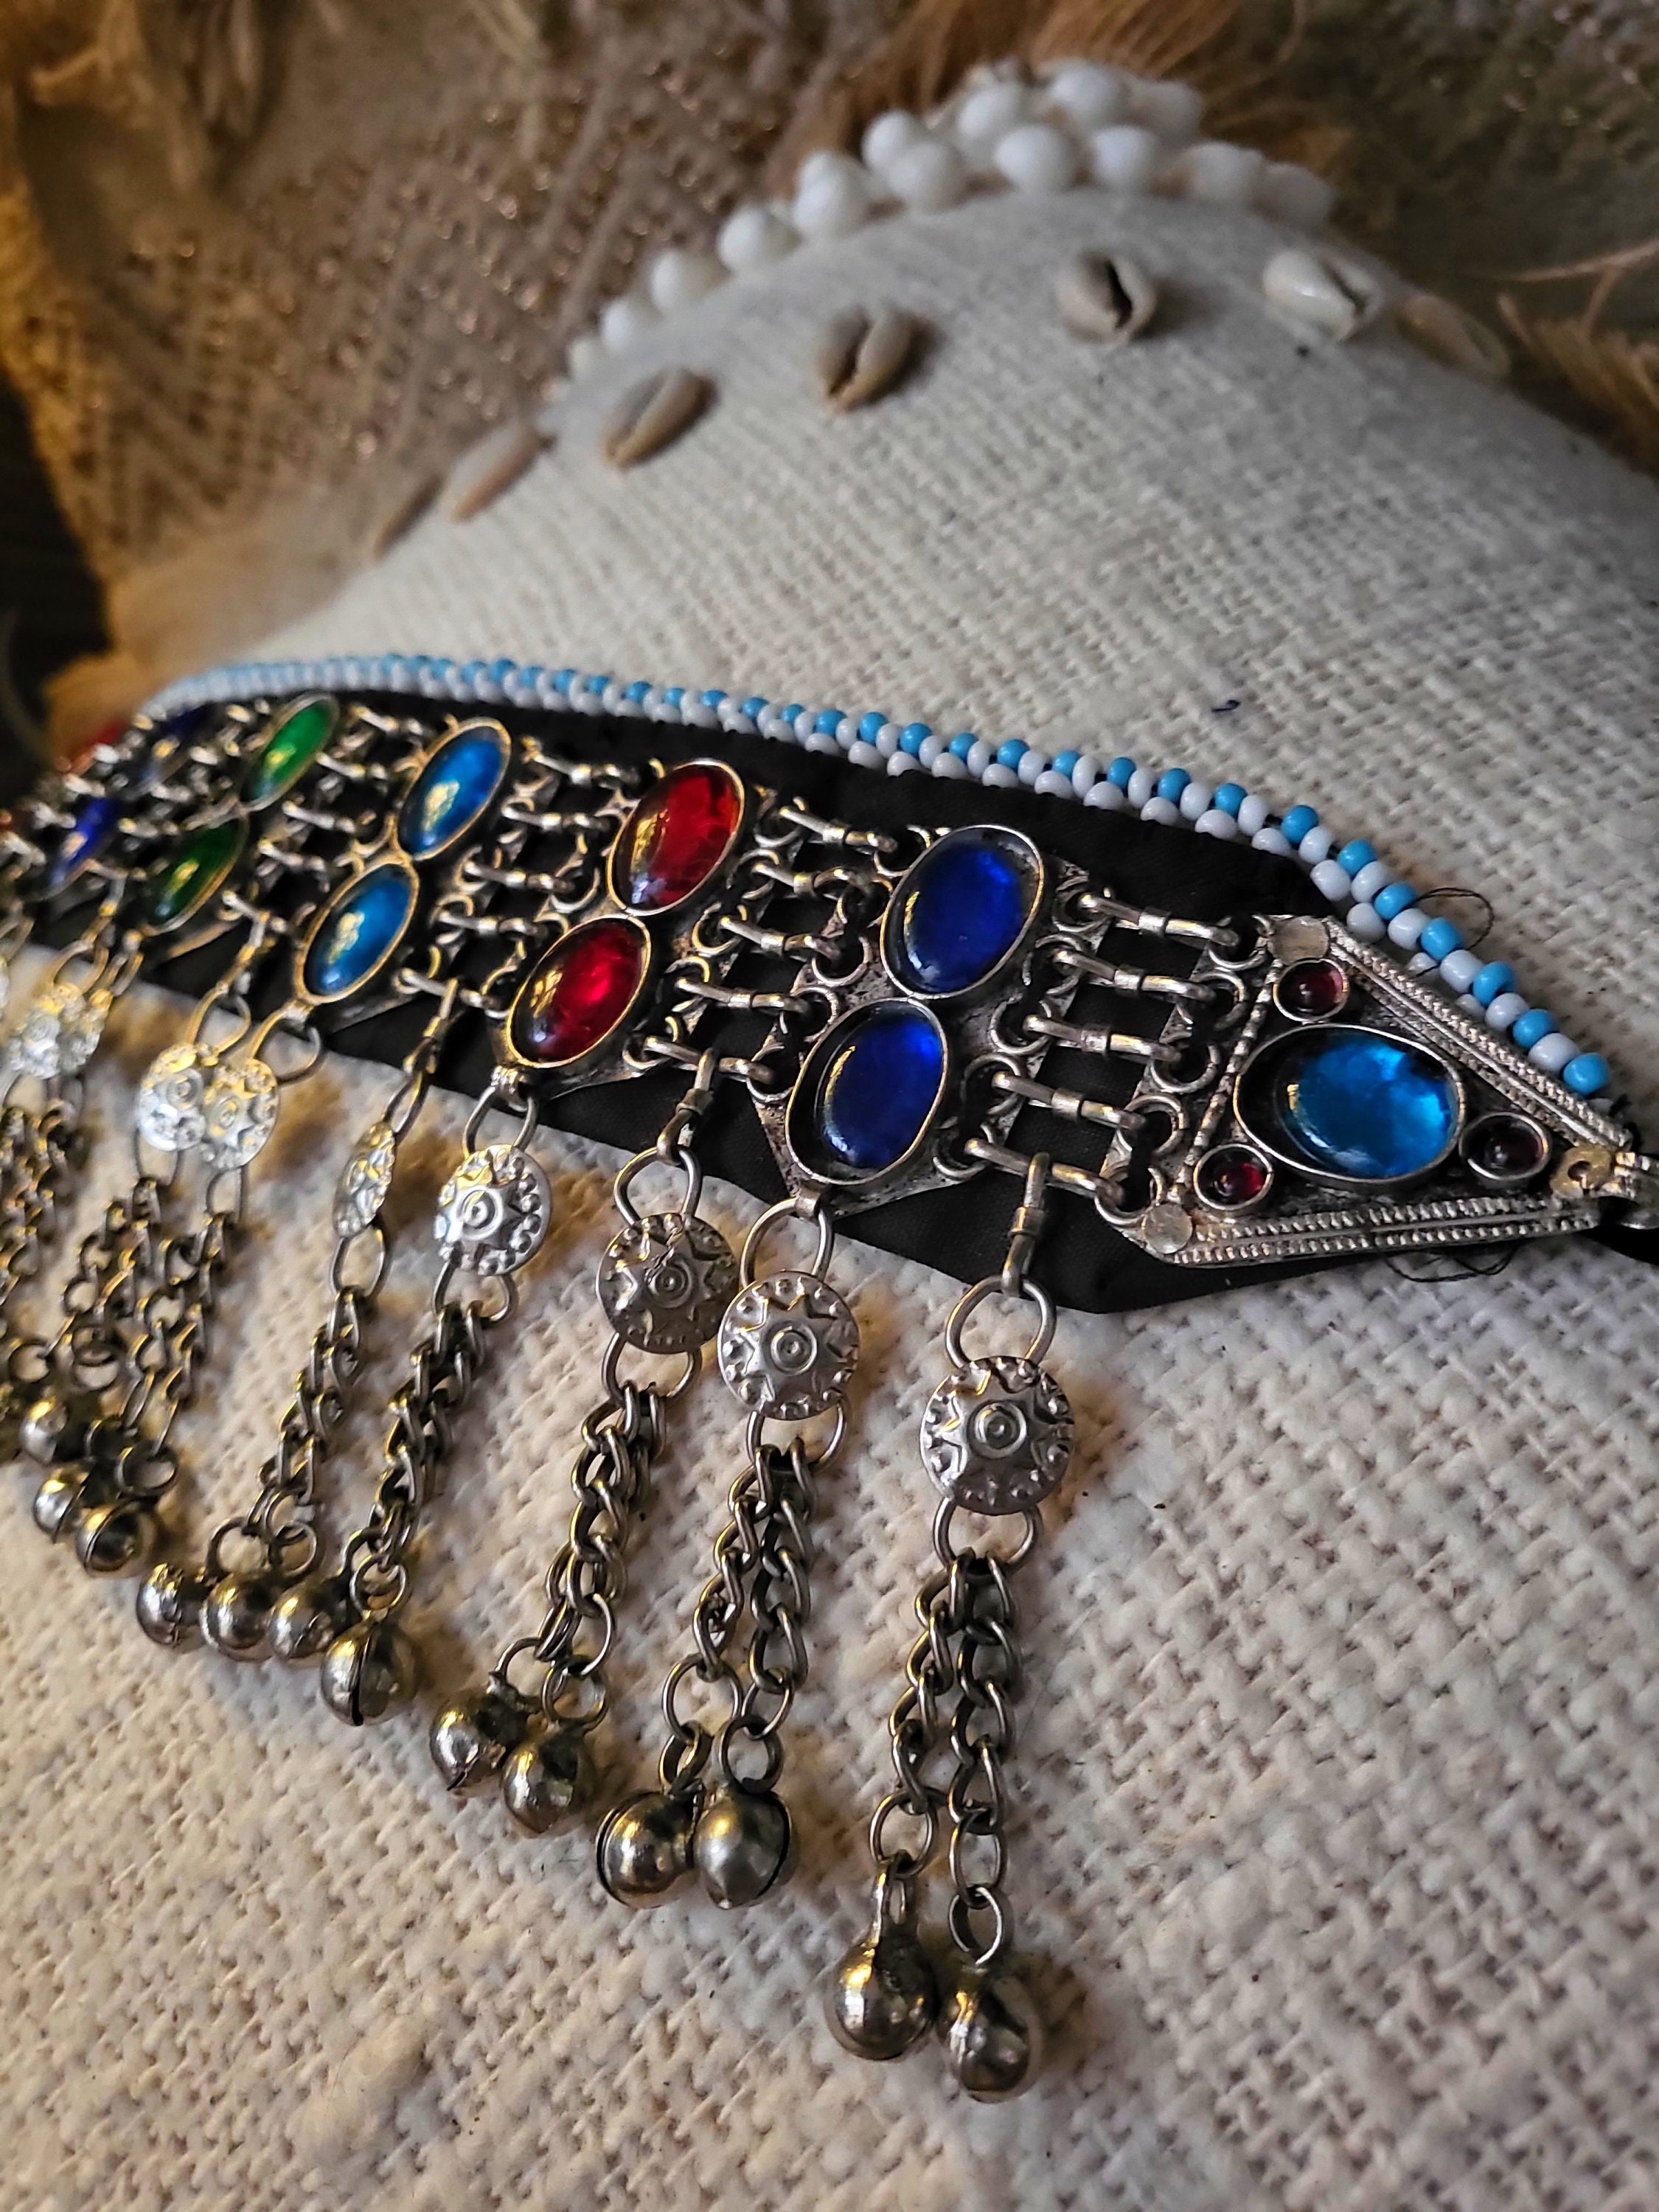 Afghani Tribal Belt with Kuchi Pendants, Coins, and Chain Drapes